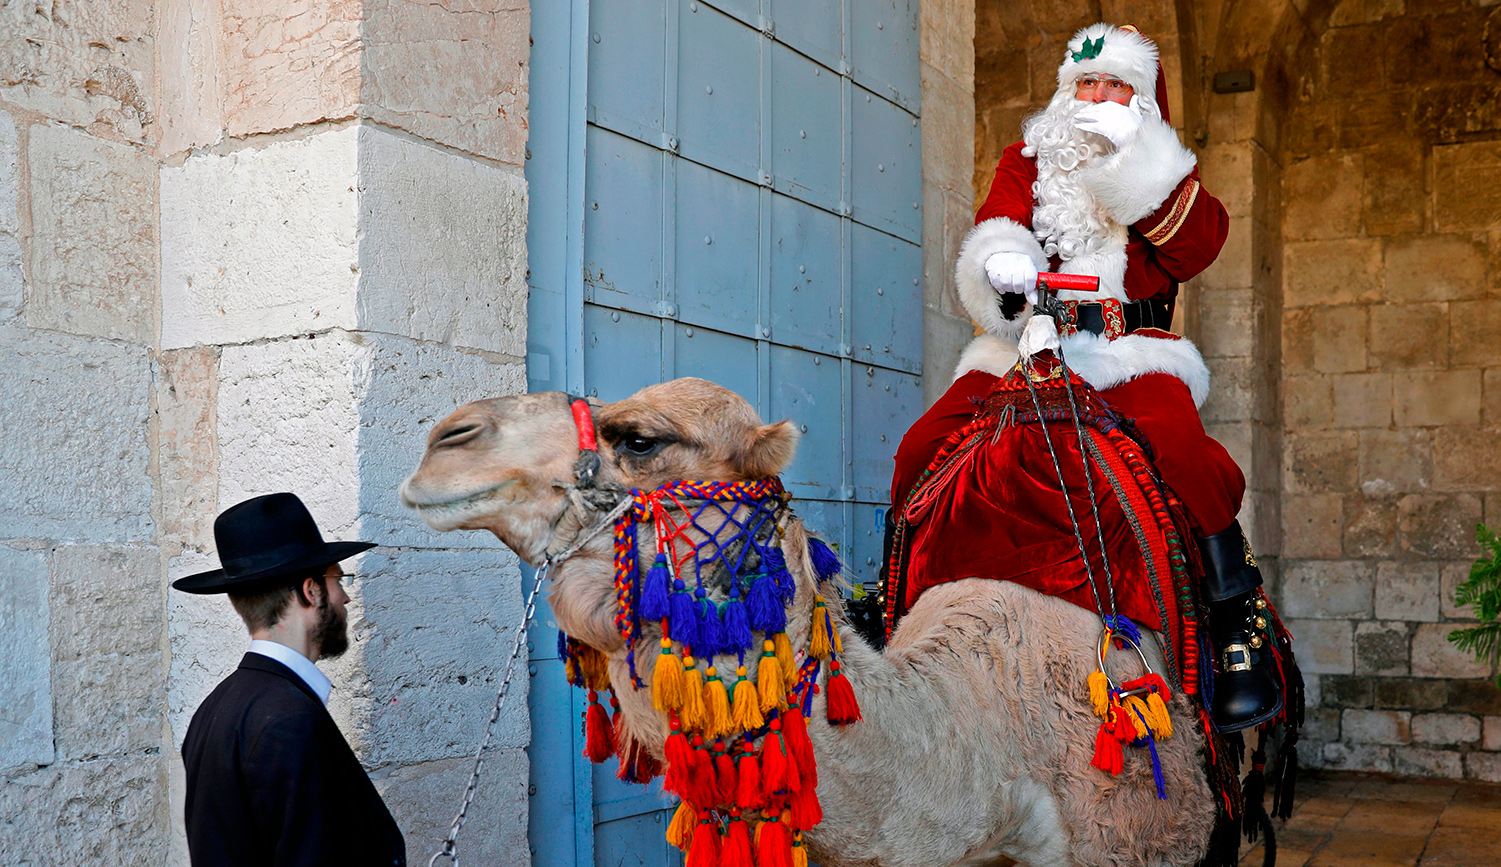 A man dressed up as Santa Claus gestures as he rides a camel before an ultra-Orthodox Jewish man in Jerusalem&#8217;s Old City on December 19, 2019.  AHMAD GHARABLI/AFP via Getty Images.
